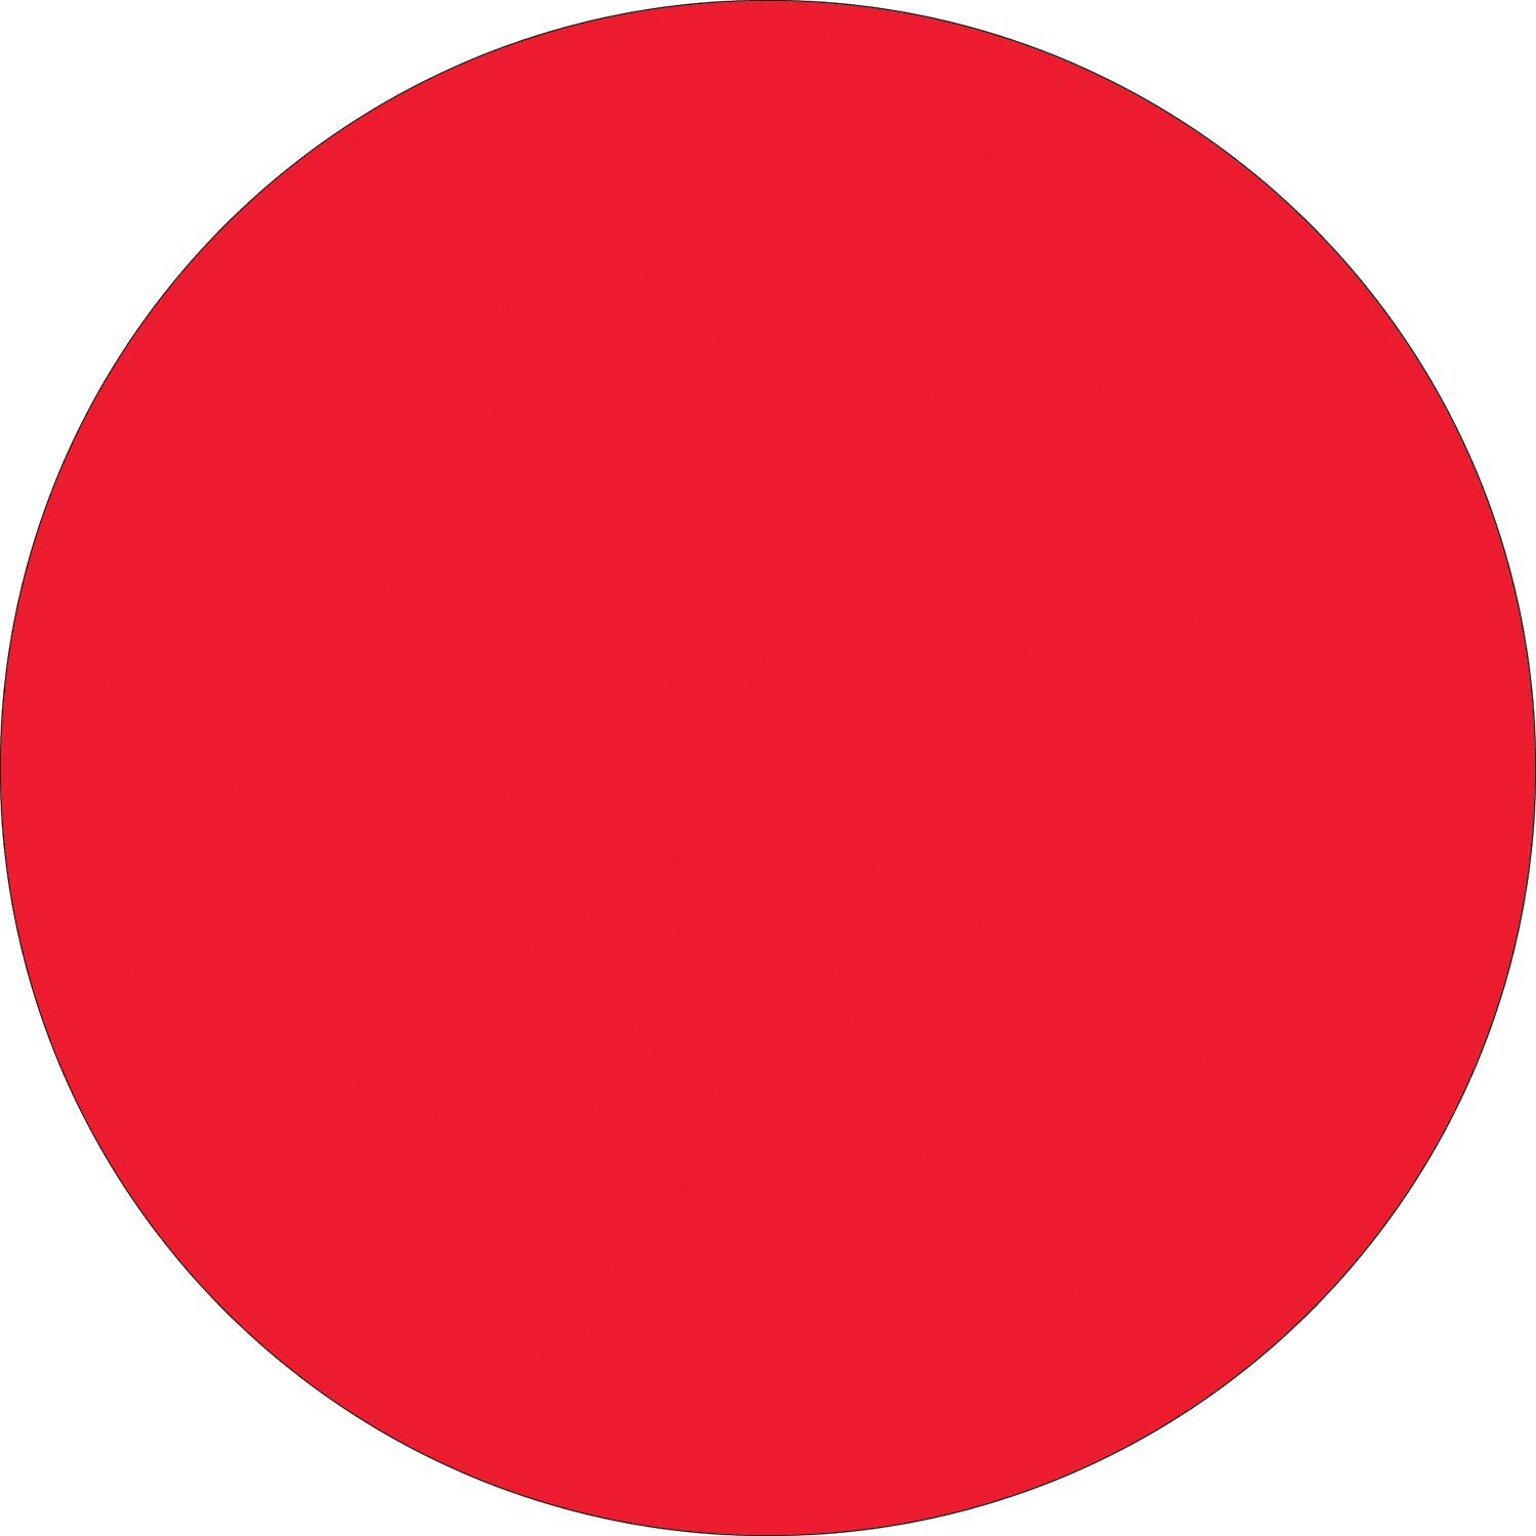 Tape Logic 2 Circle Inventory Label, Fluorescent Red, 500/Roll